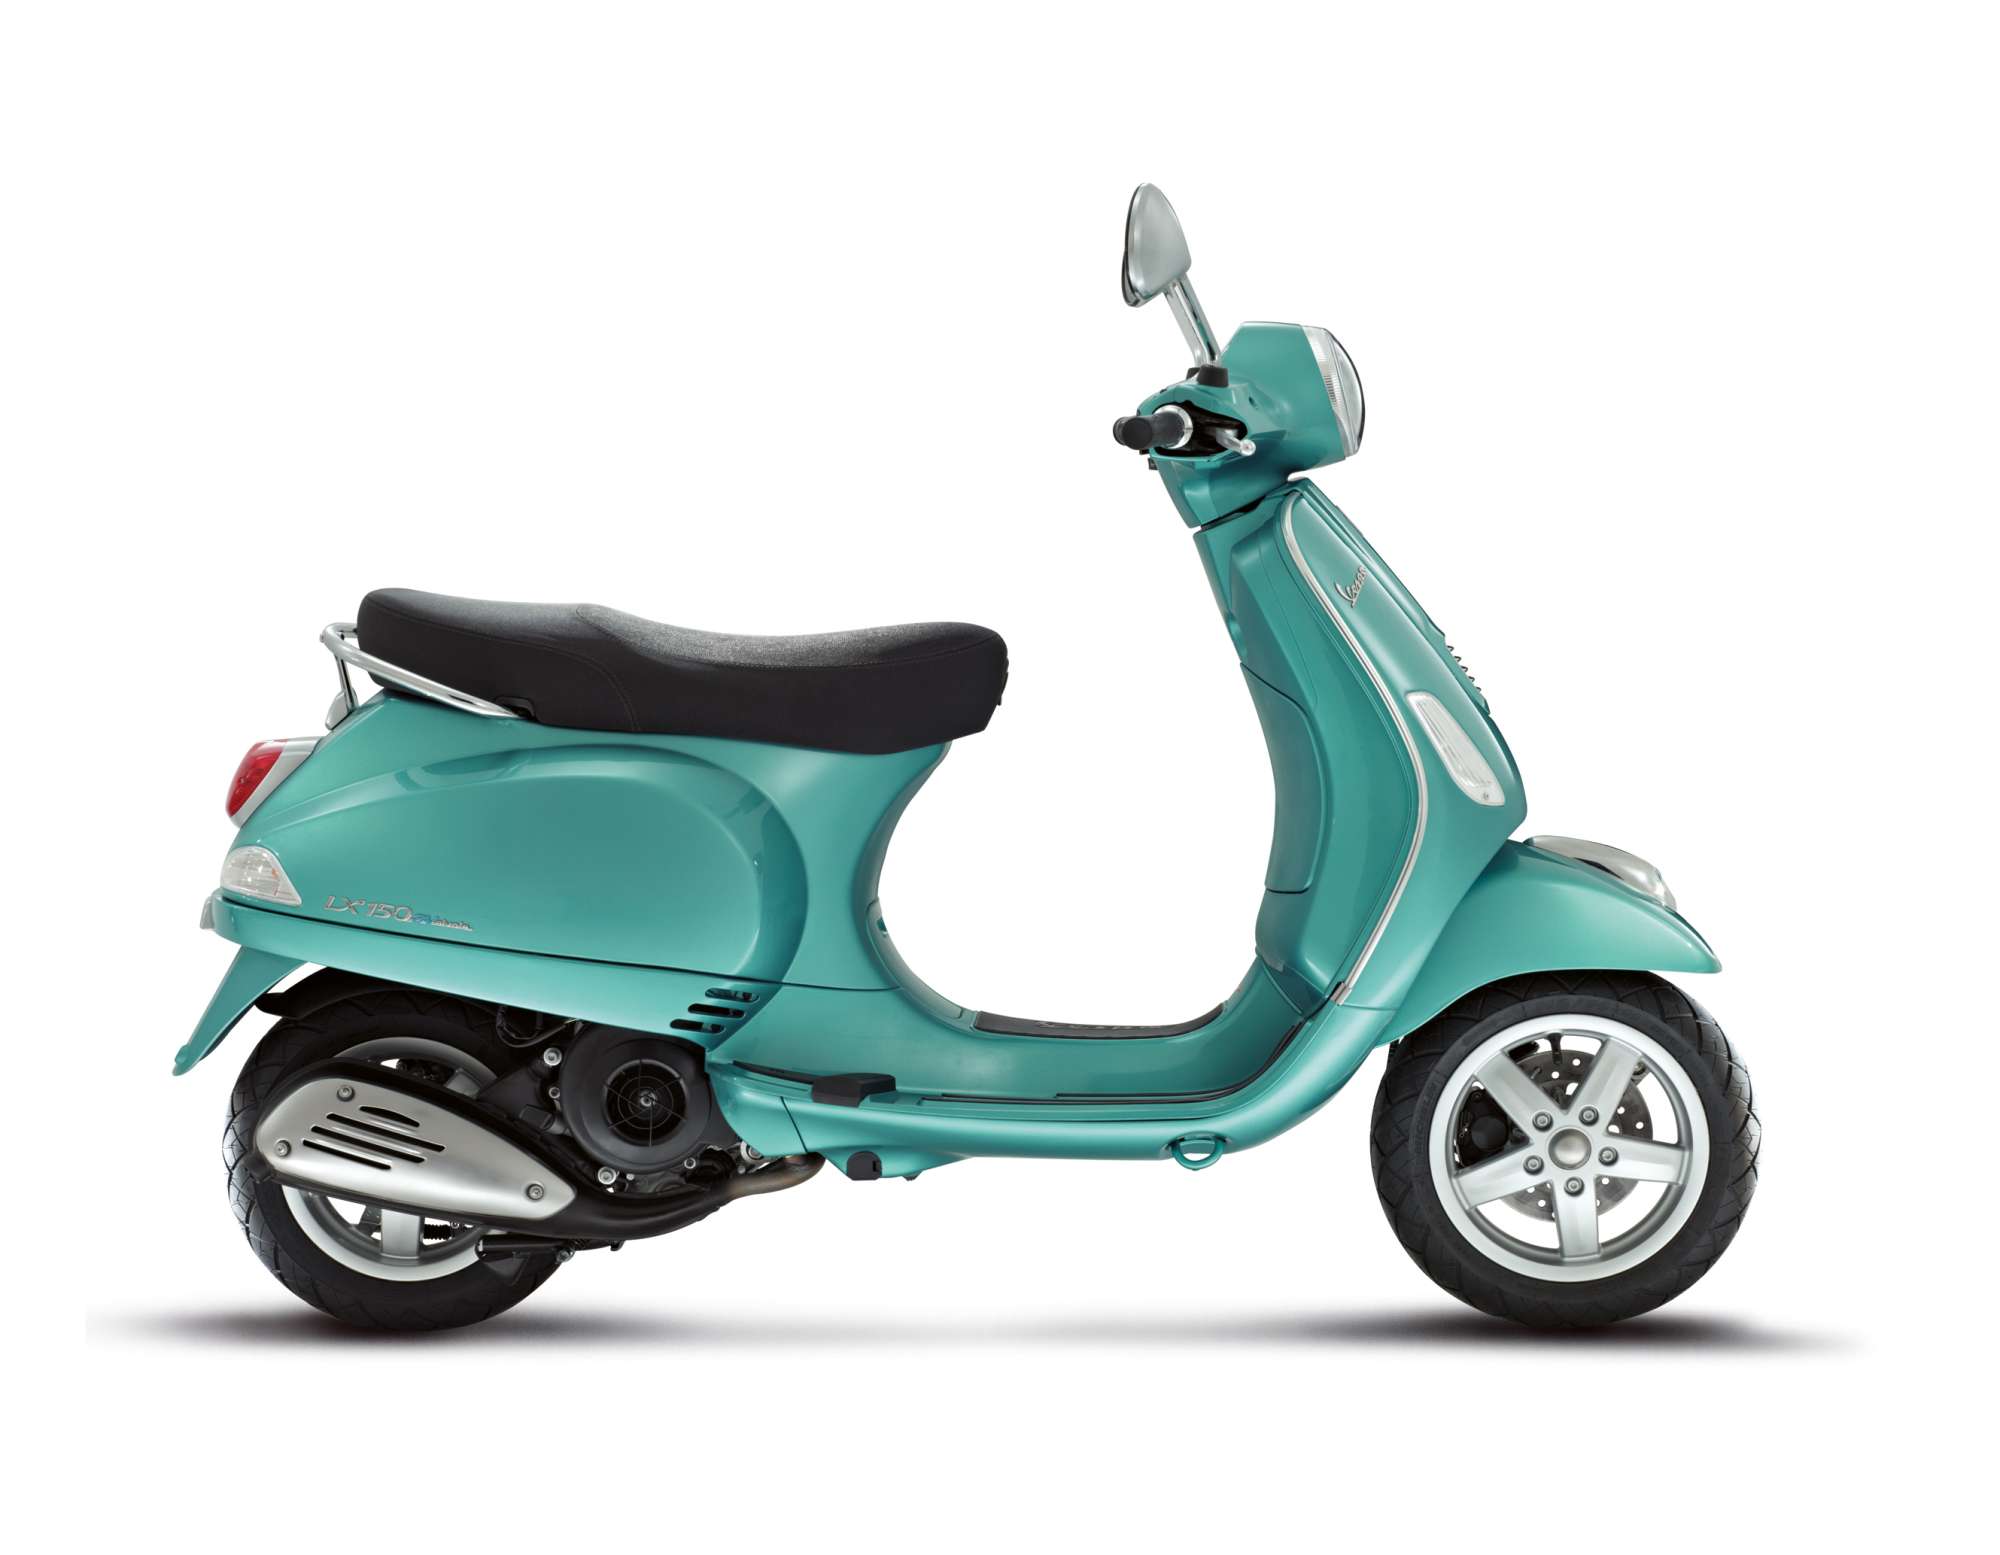 Vespa LX 125 BS6 Price In India,Mileage,Offers,Specs,Reviews